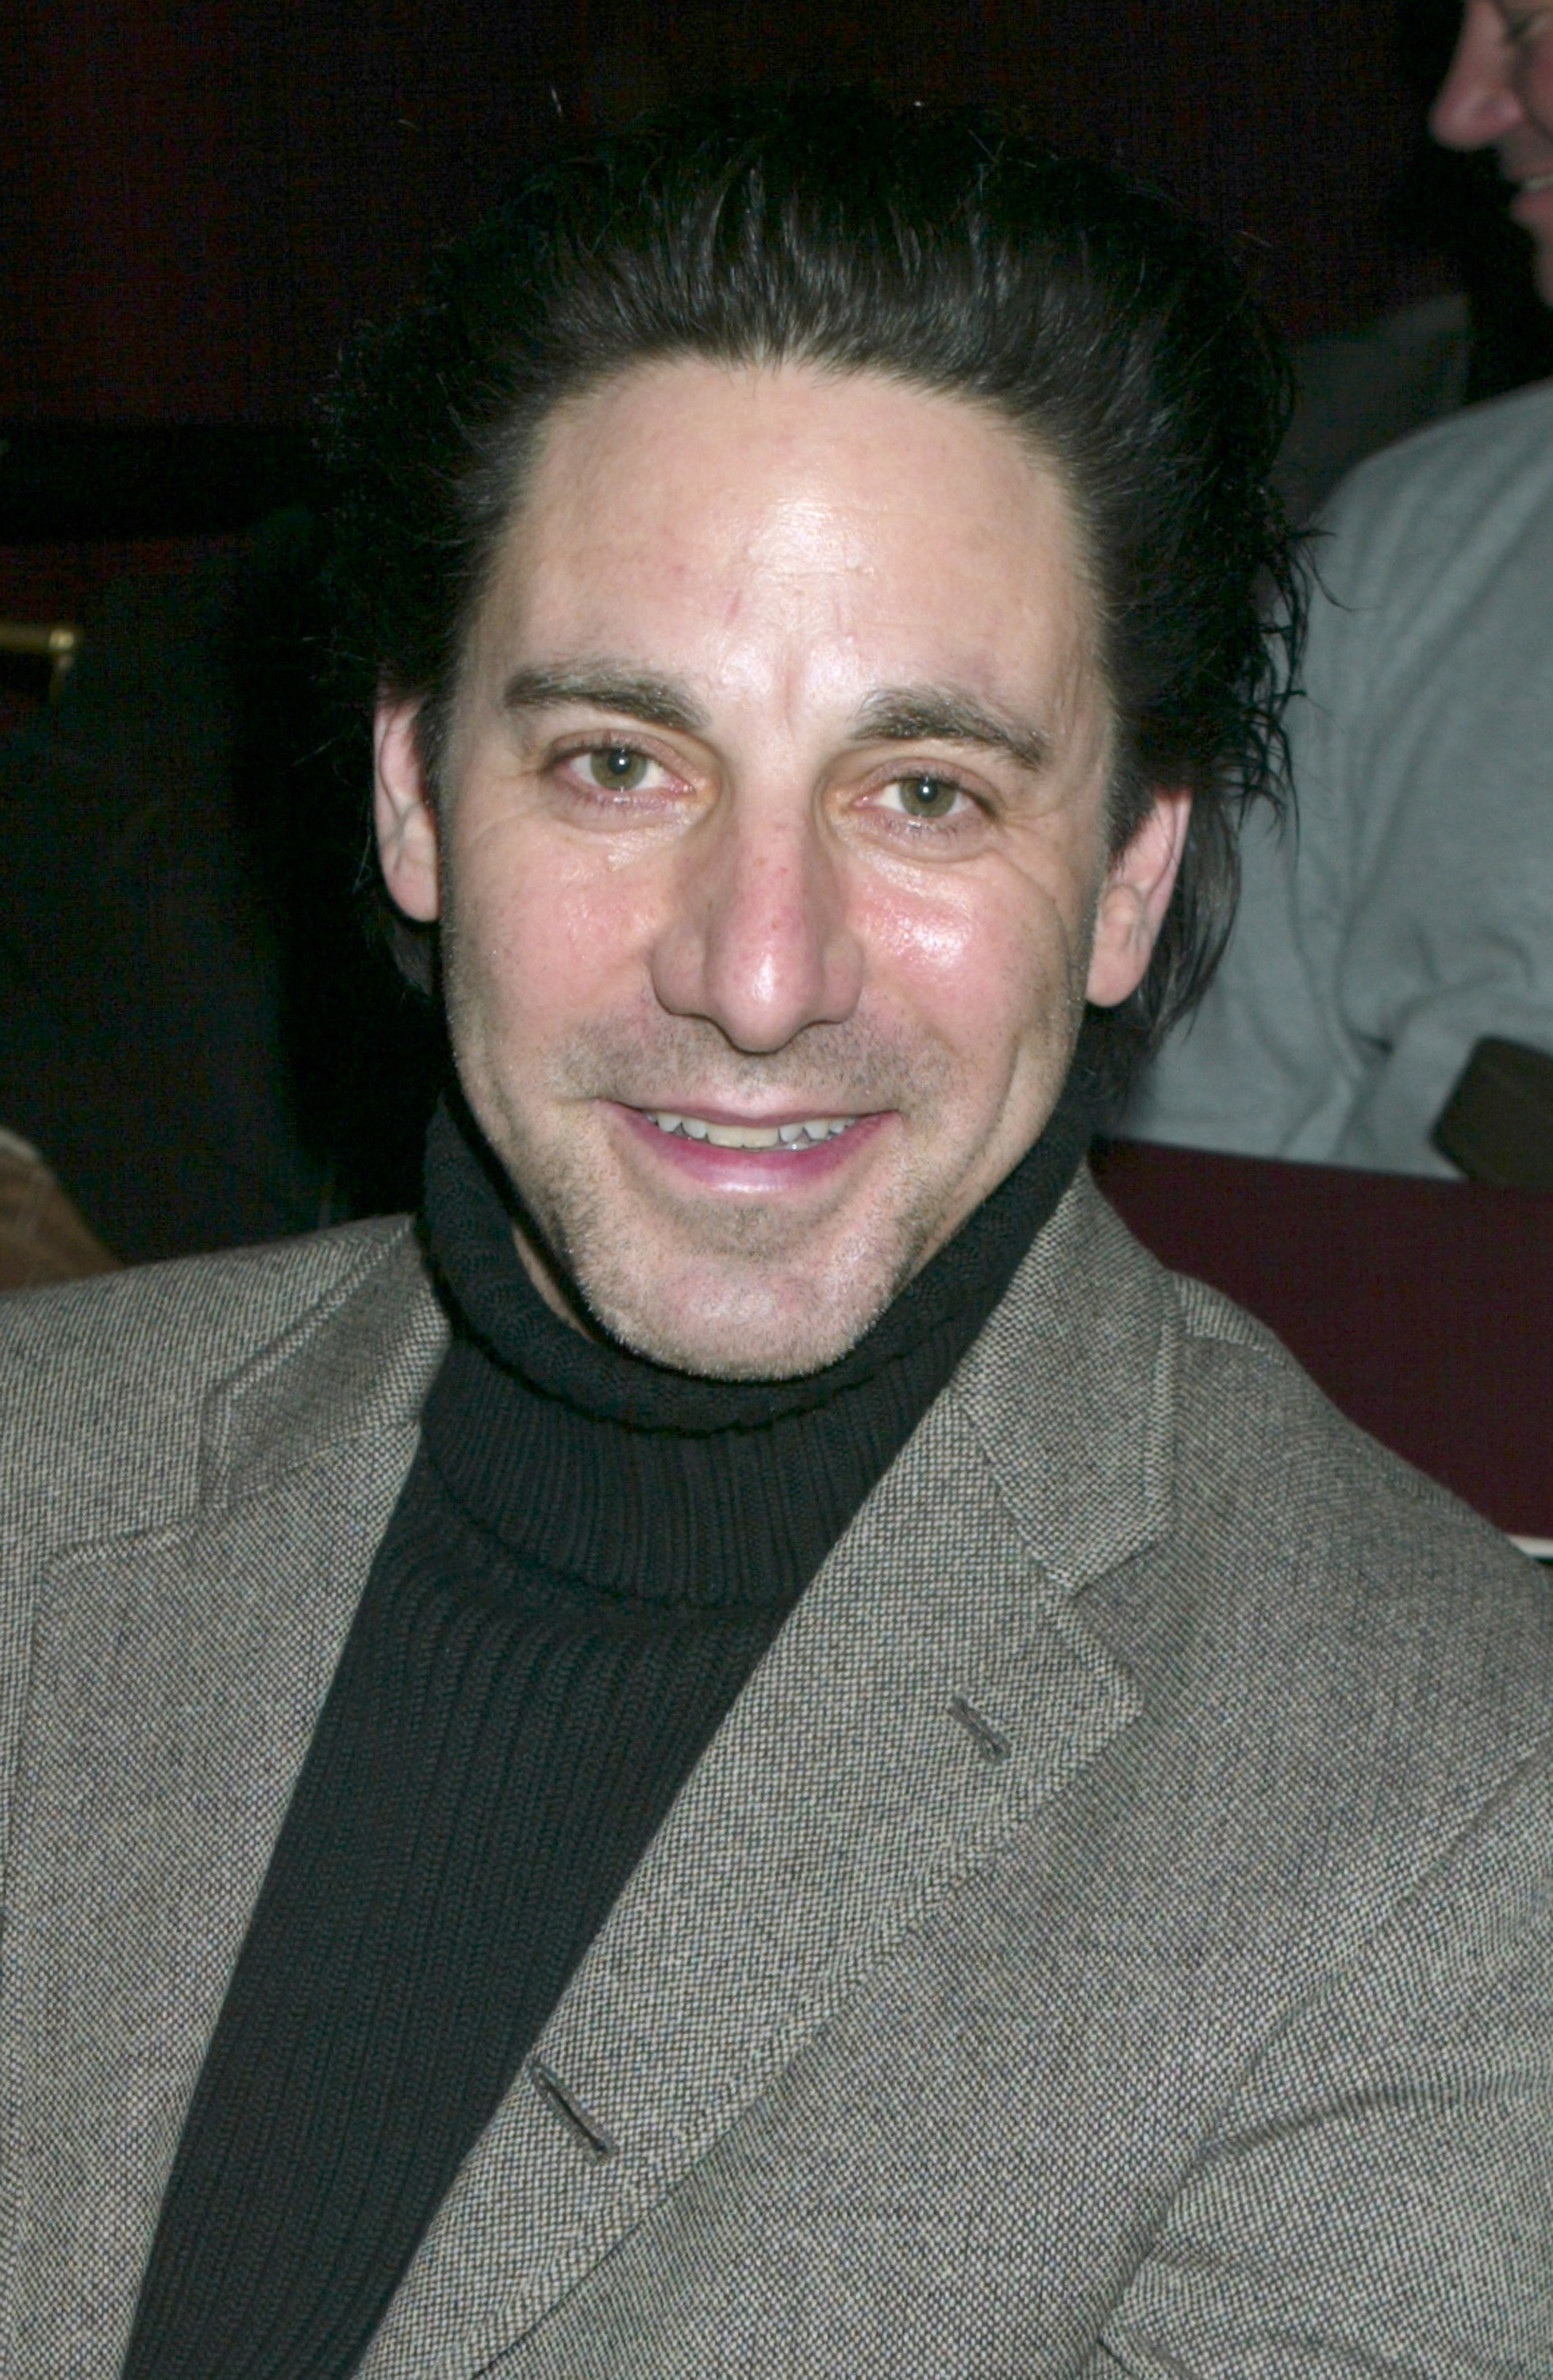 Scott Cohen is photographed at the John Varvatos Men's Fashion Show in 2003 in Bryant Park